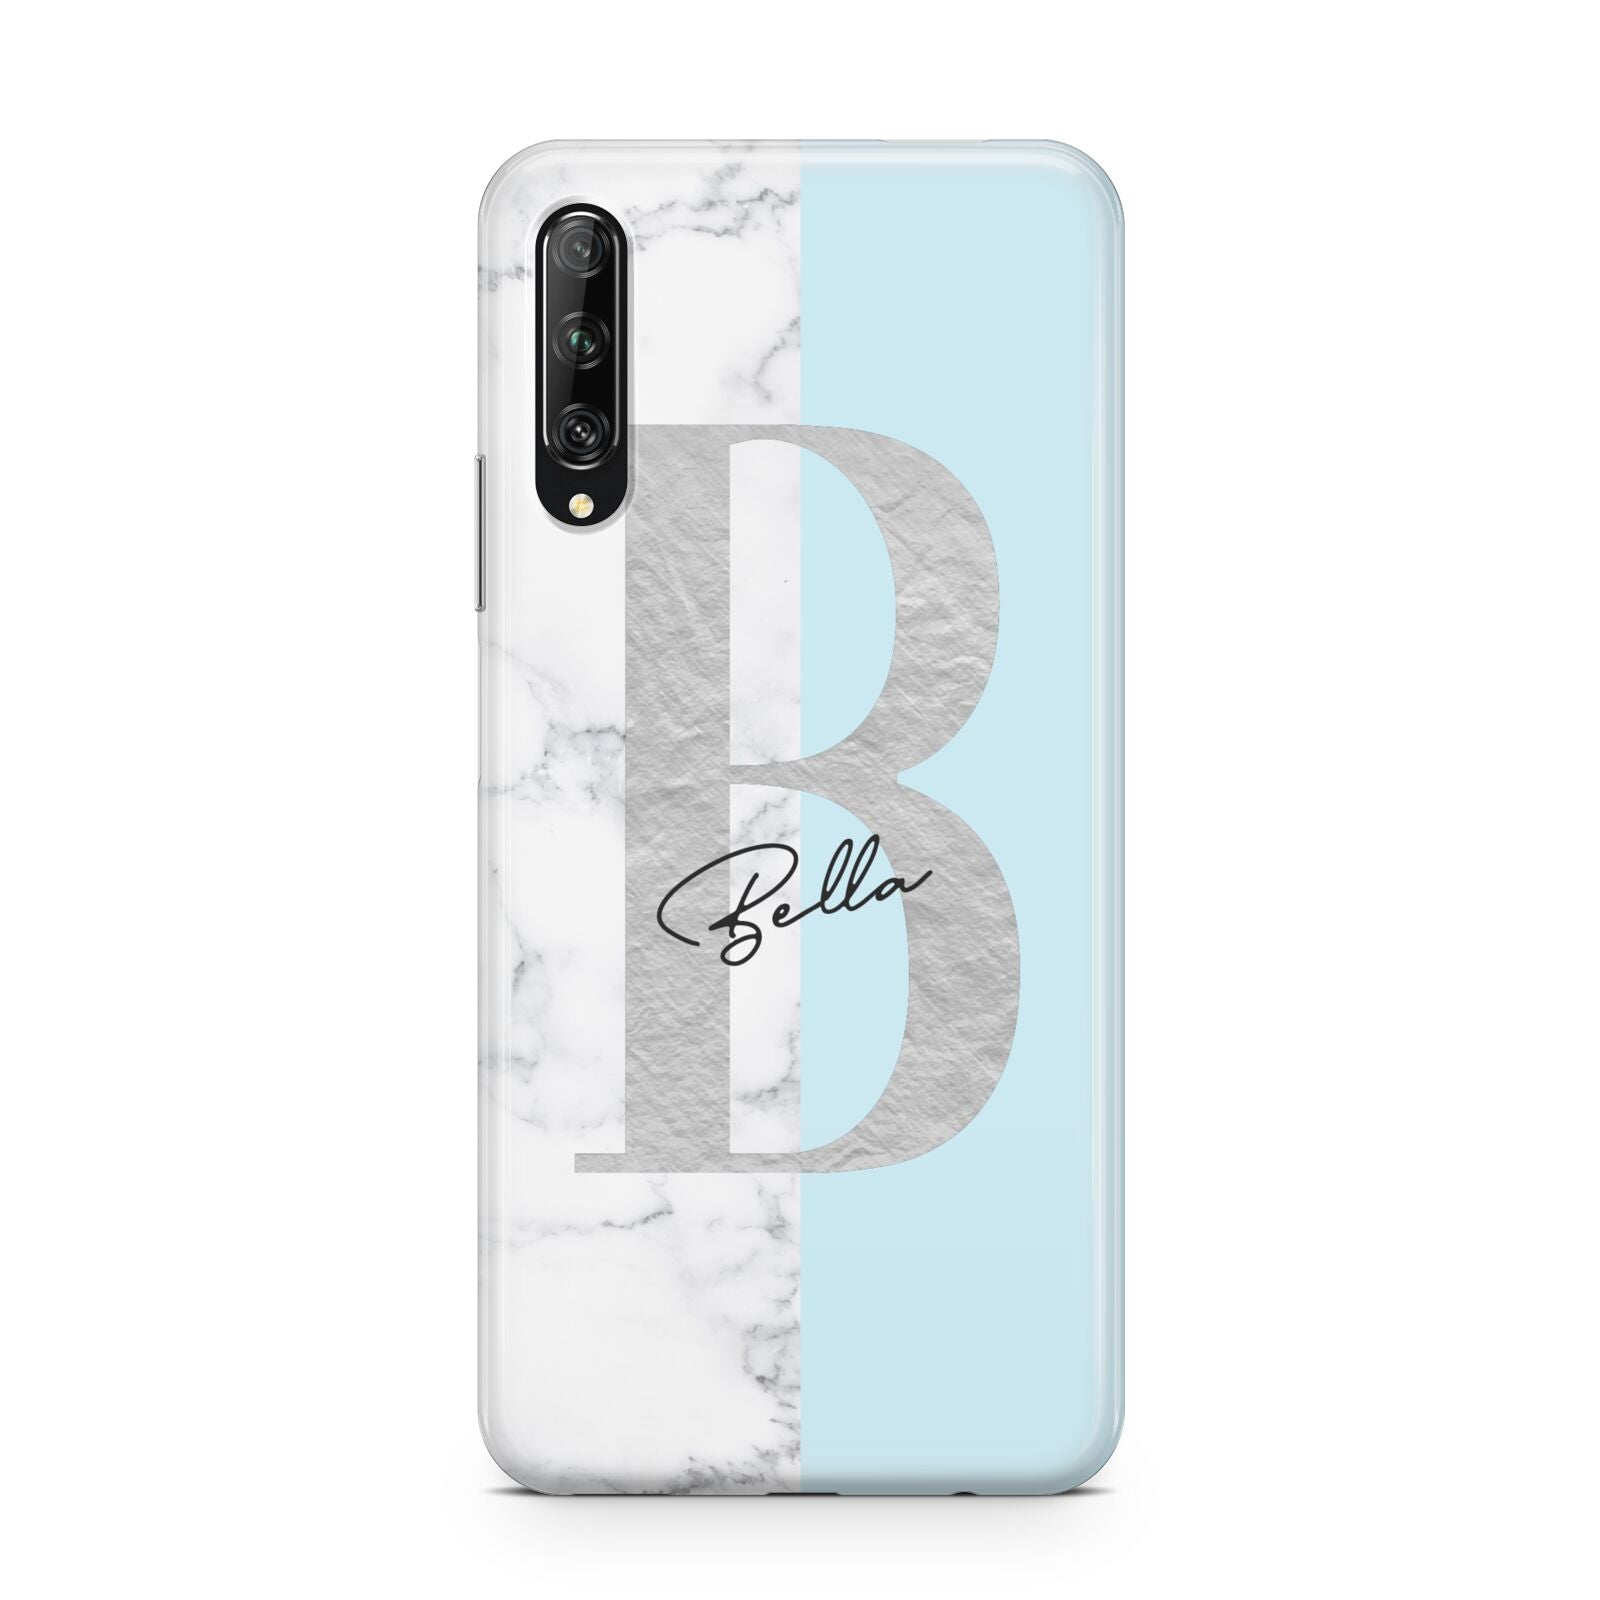 Personalised Chrome Marble Huawei P Smart Pro 2019